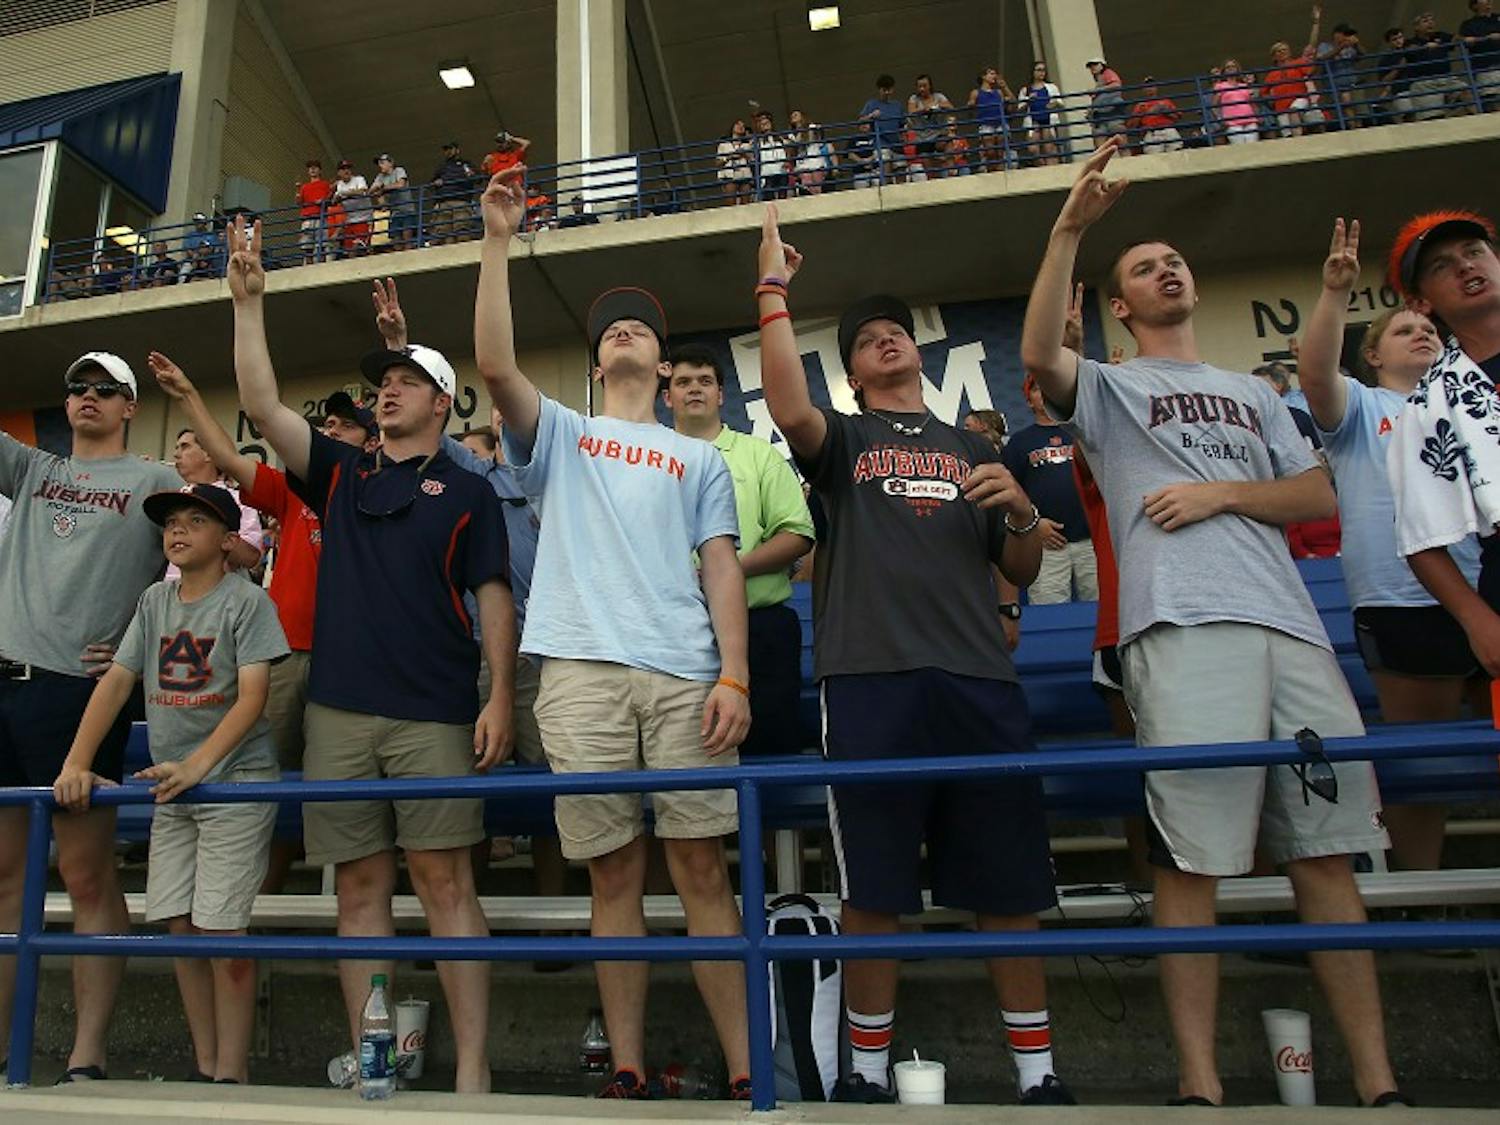 Section 111 sings during the seventh inning stretch in Auburn’s game against Kentucky in the SEC Tournament on Tuesday, May 19. (Contributed by Todd Van Emst) 